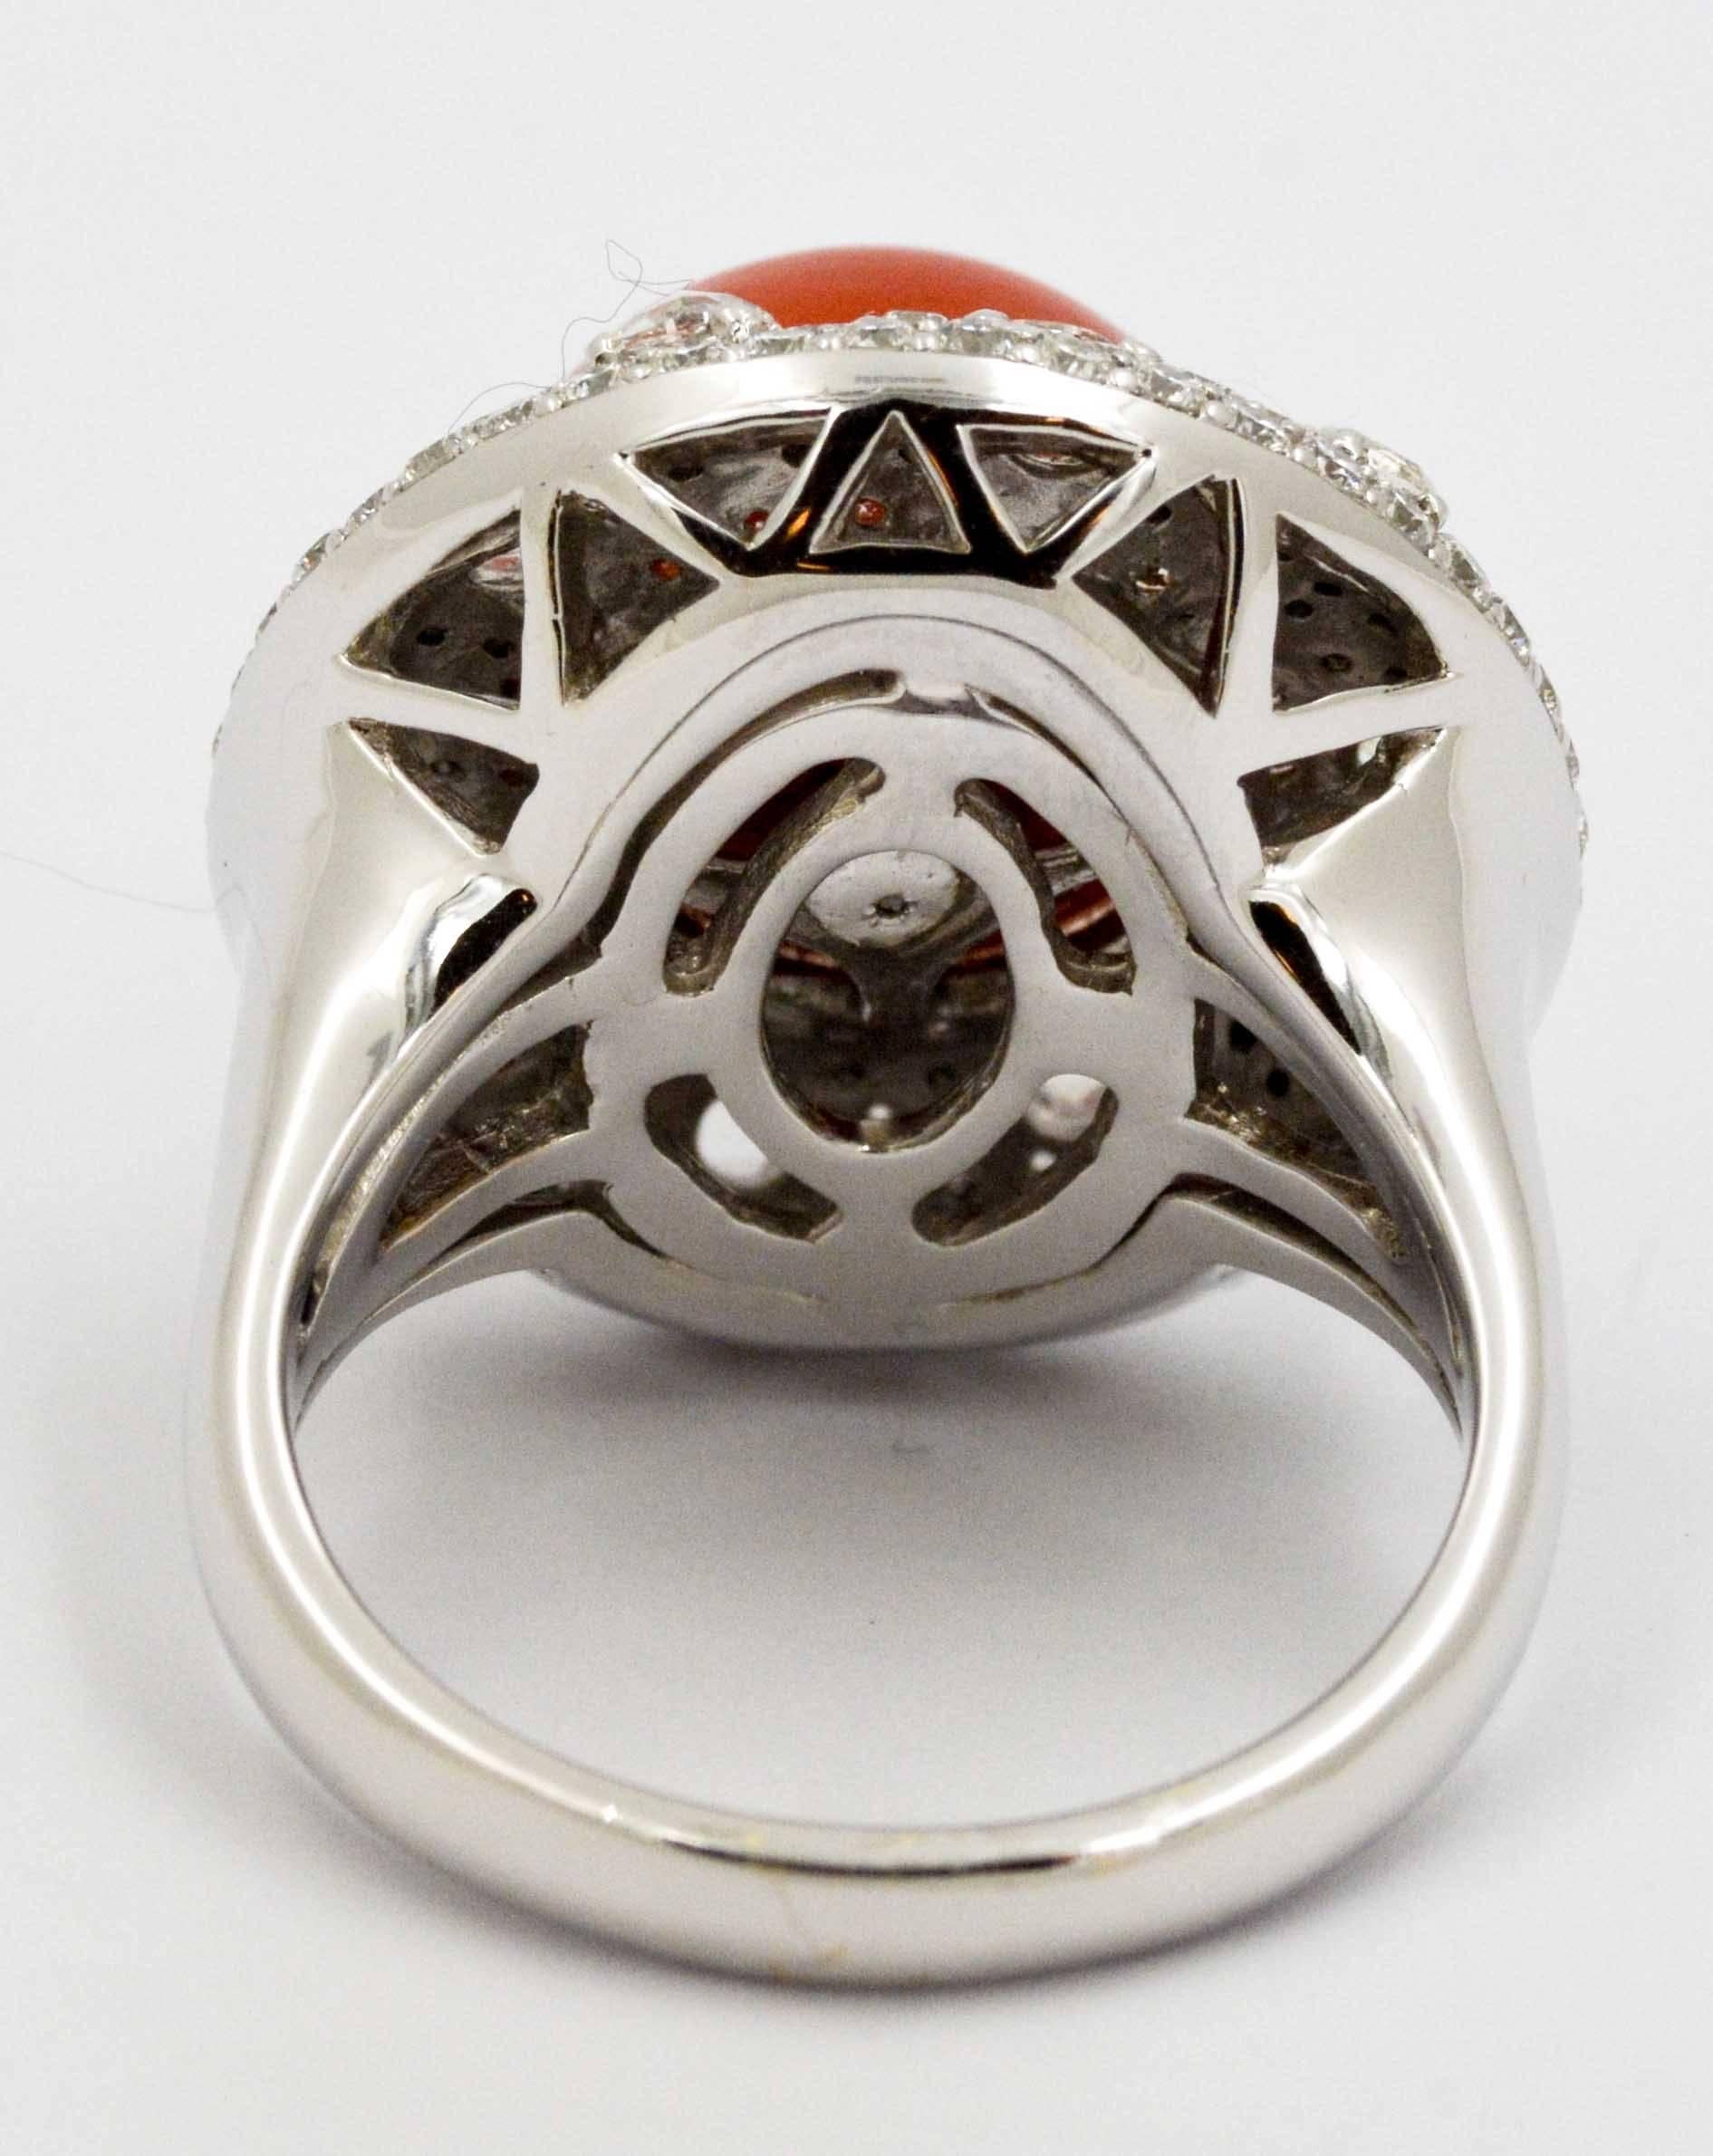 Bead Torro Del Diamond White Gold Ring Centered with Red Coral